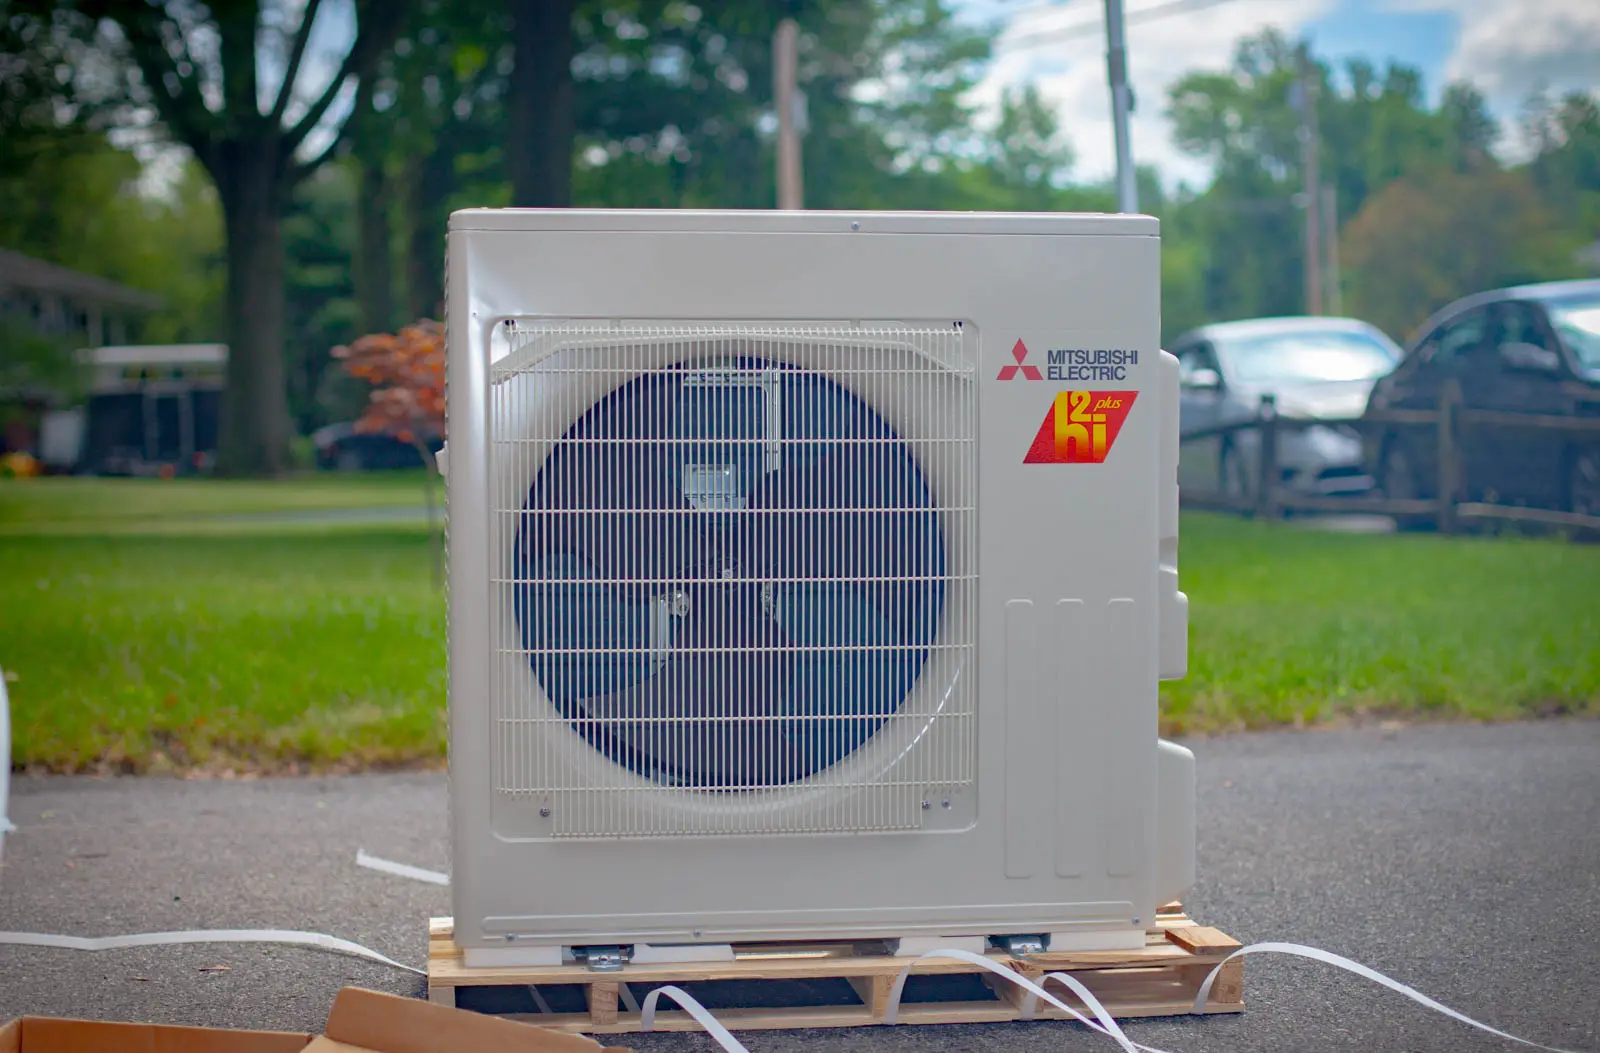 Mitsubishi Heating and Cooling Electric HVAC system on a loading crate with trees and grass in the background.